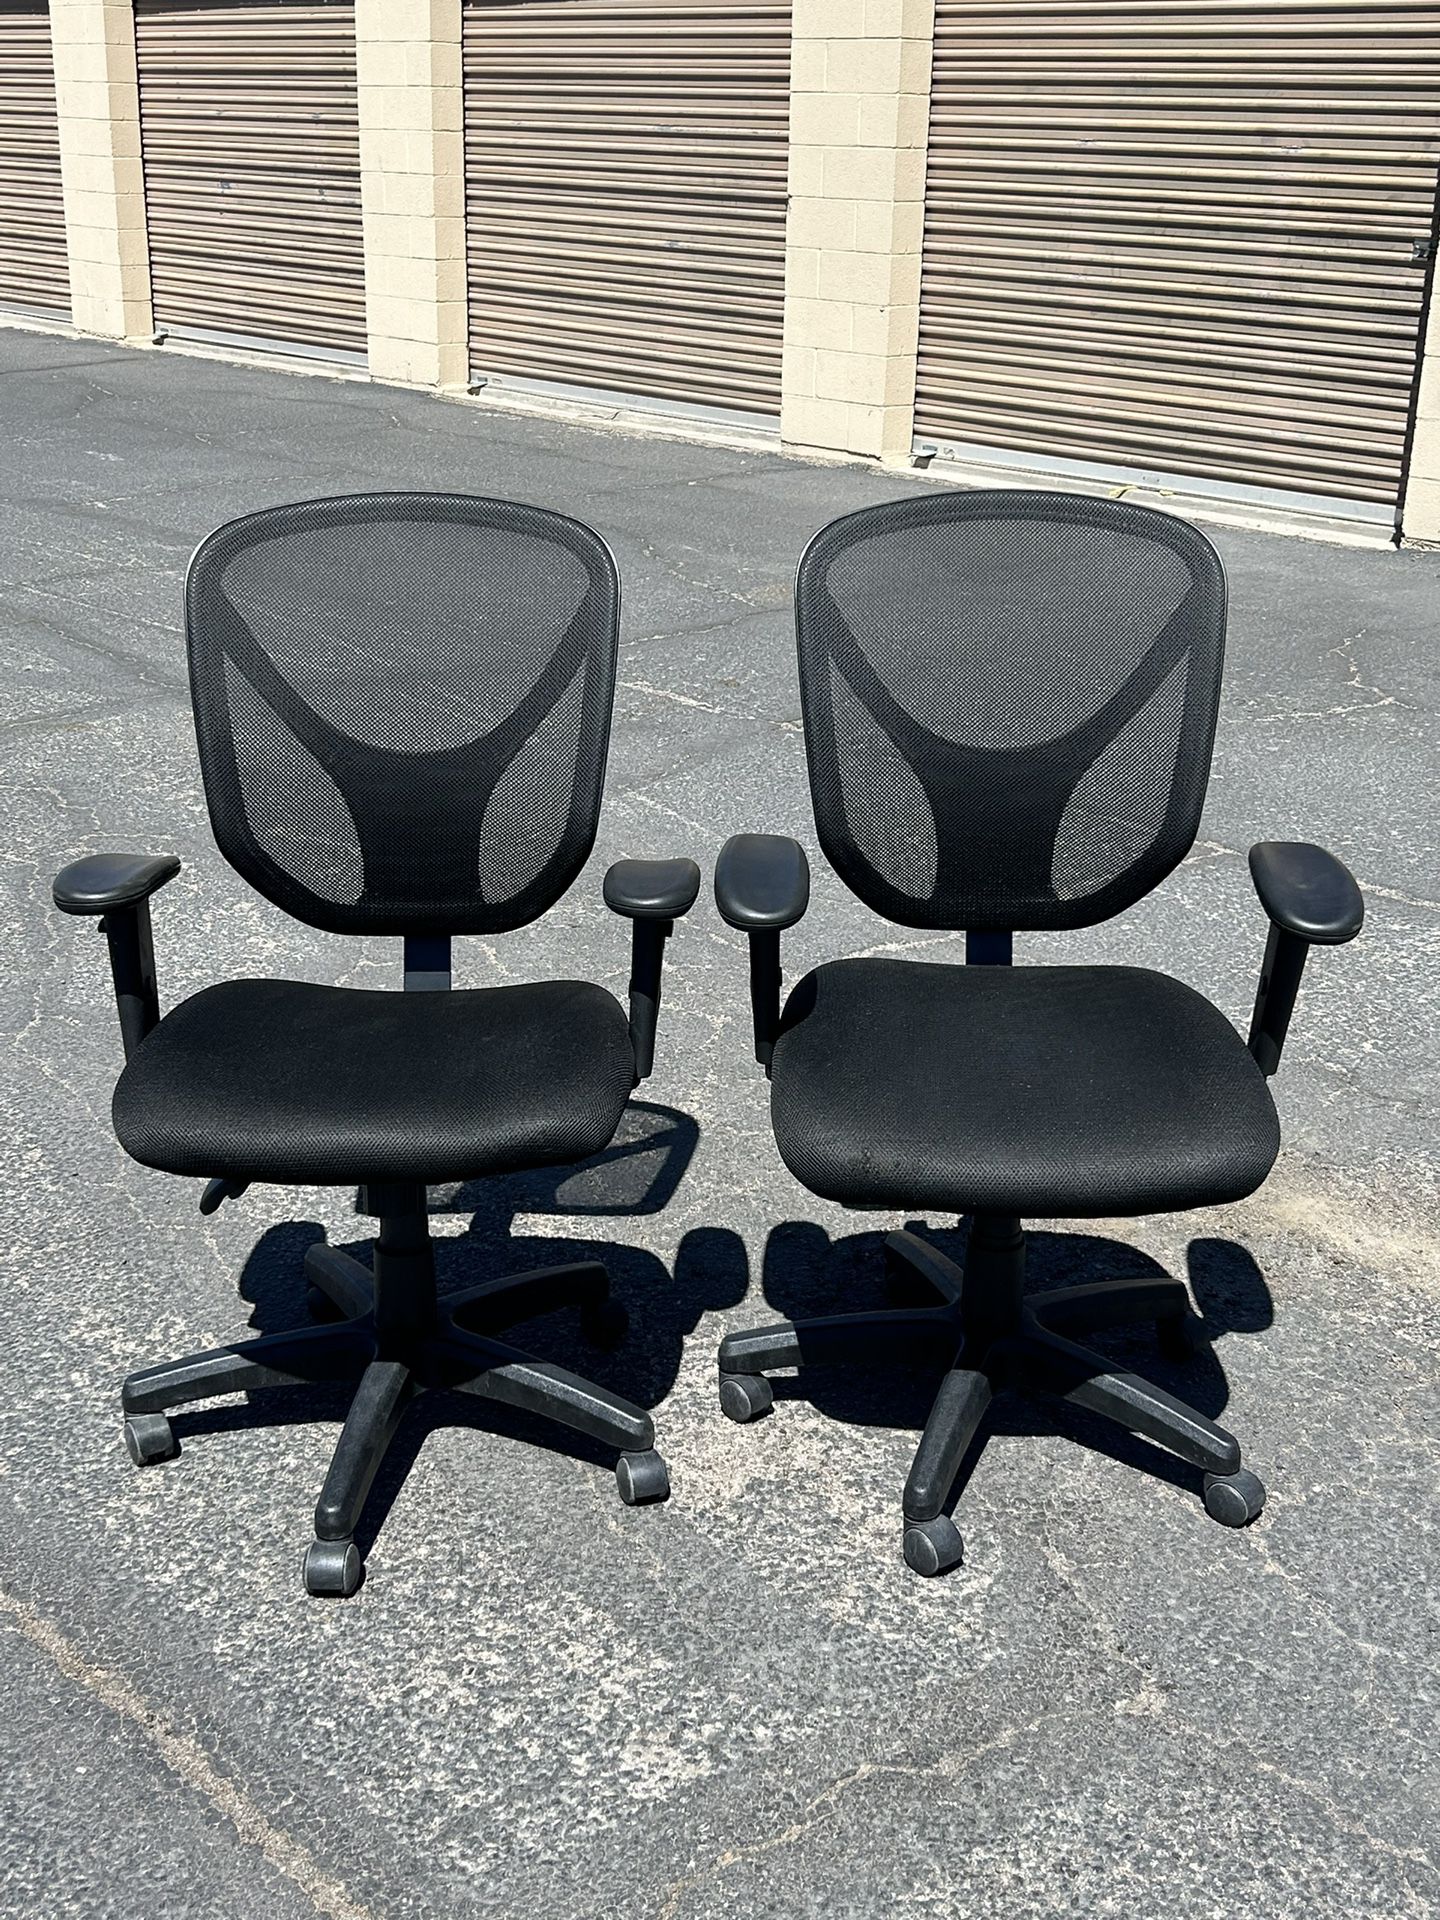 2 Nice Office Chairs With Wheels- Good Condition- $40 Each